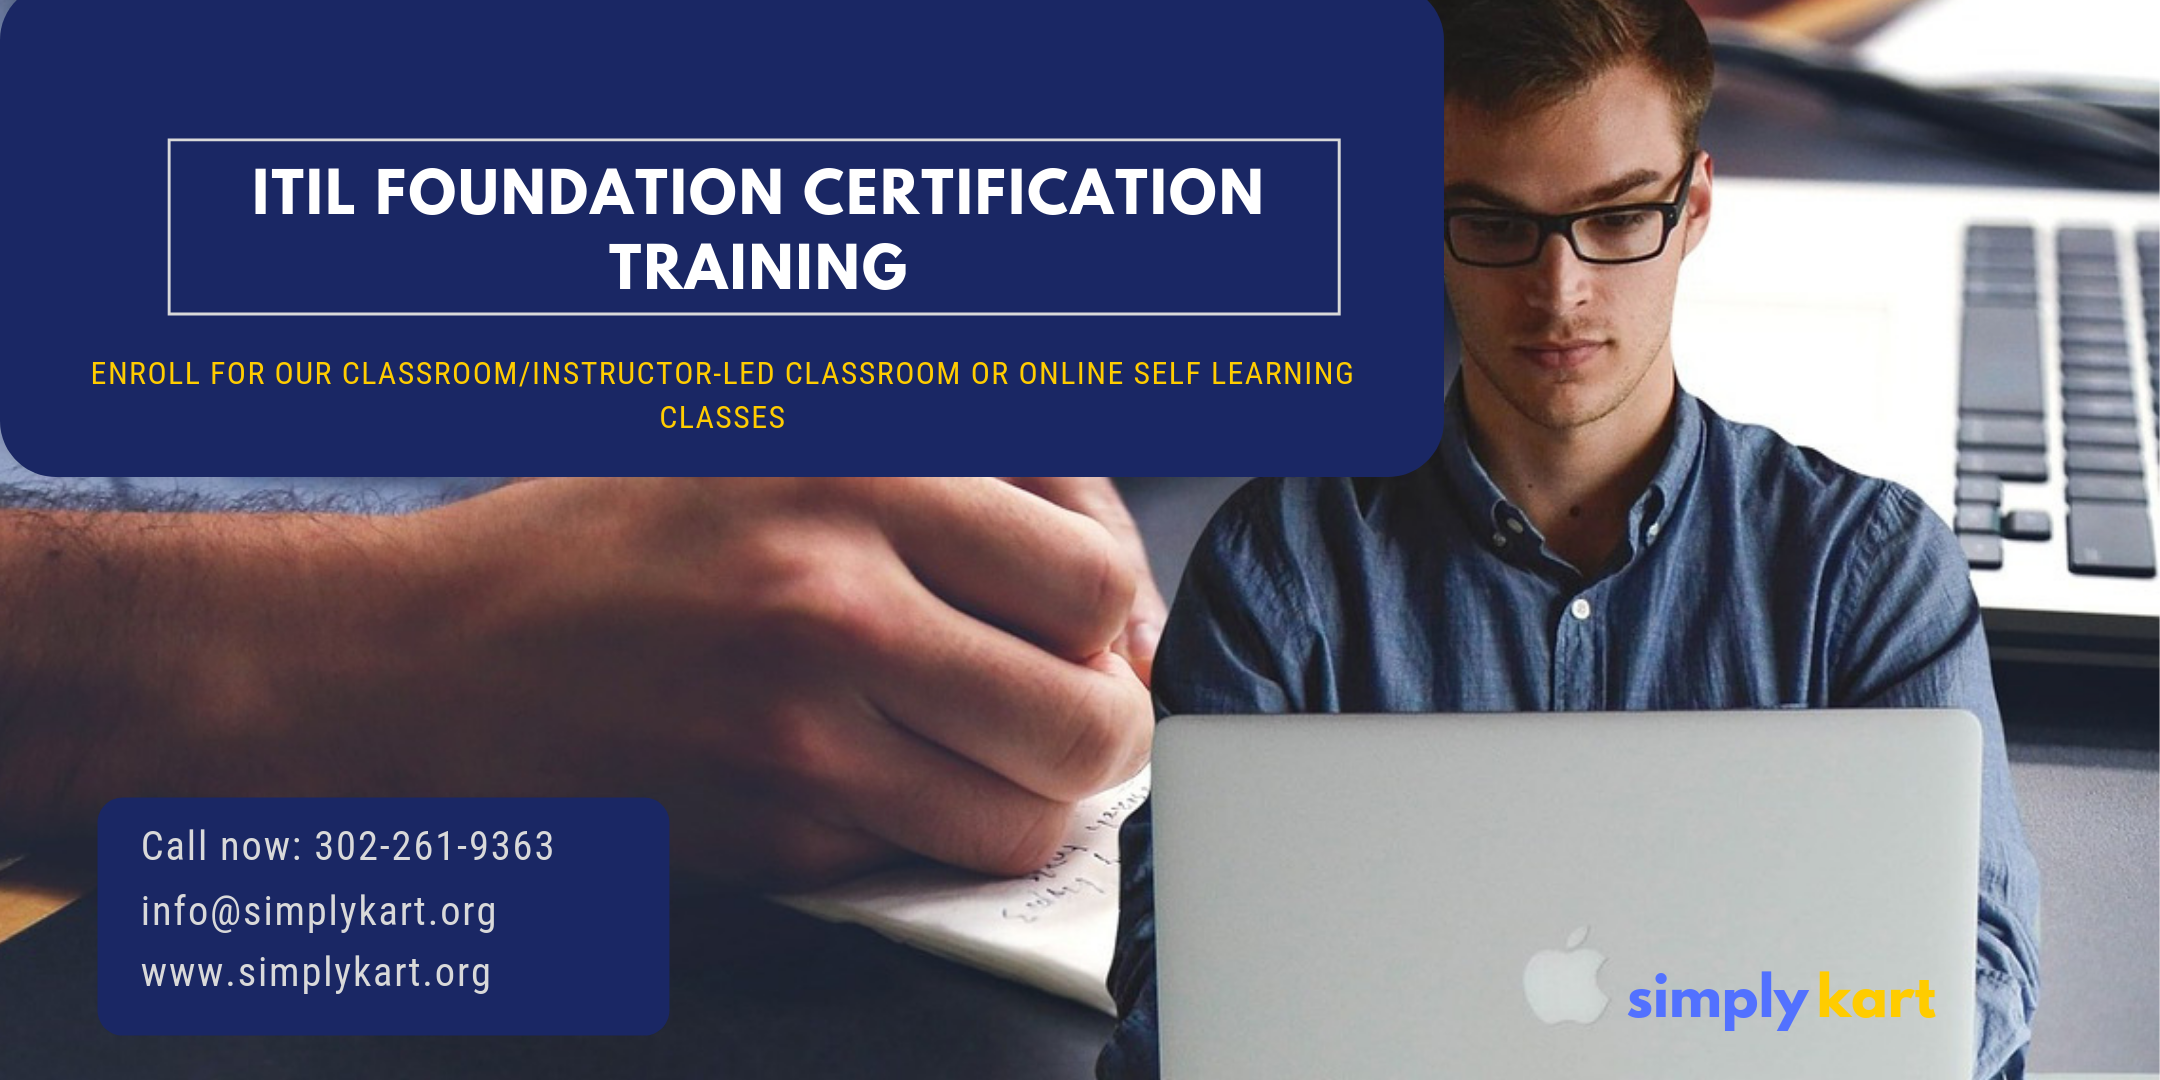 ITIL Certification Training in Toronto, ON